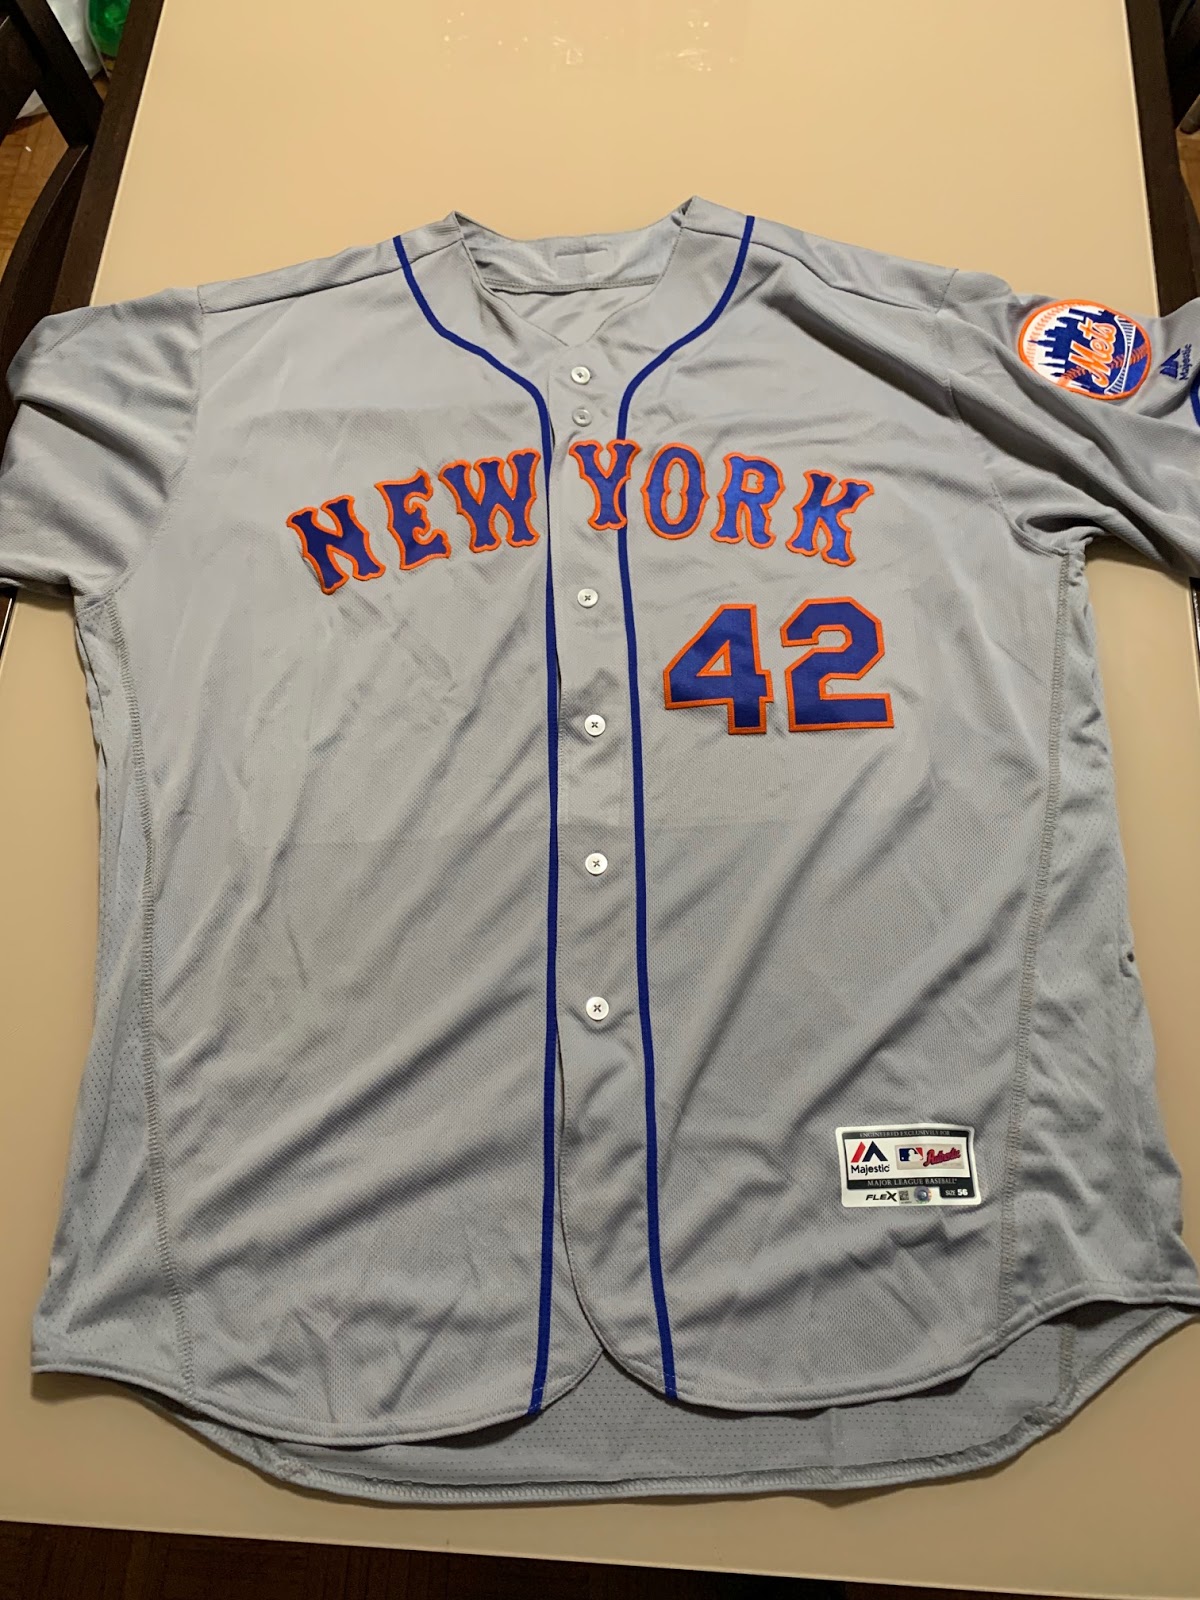  HISTORIC Big Sexy Bartolo Colon Mets Jersey up for sale.  This is the one where he tied Pedro Martinez for most Career wins